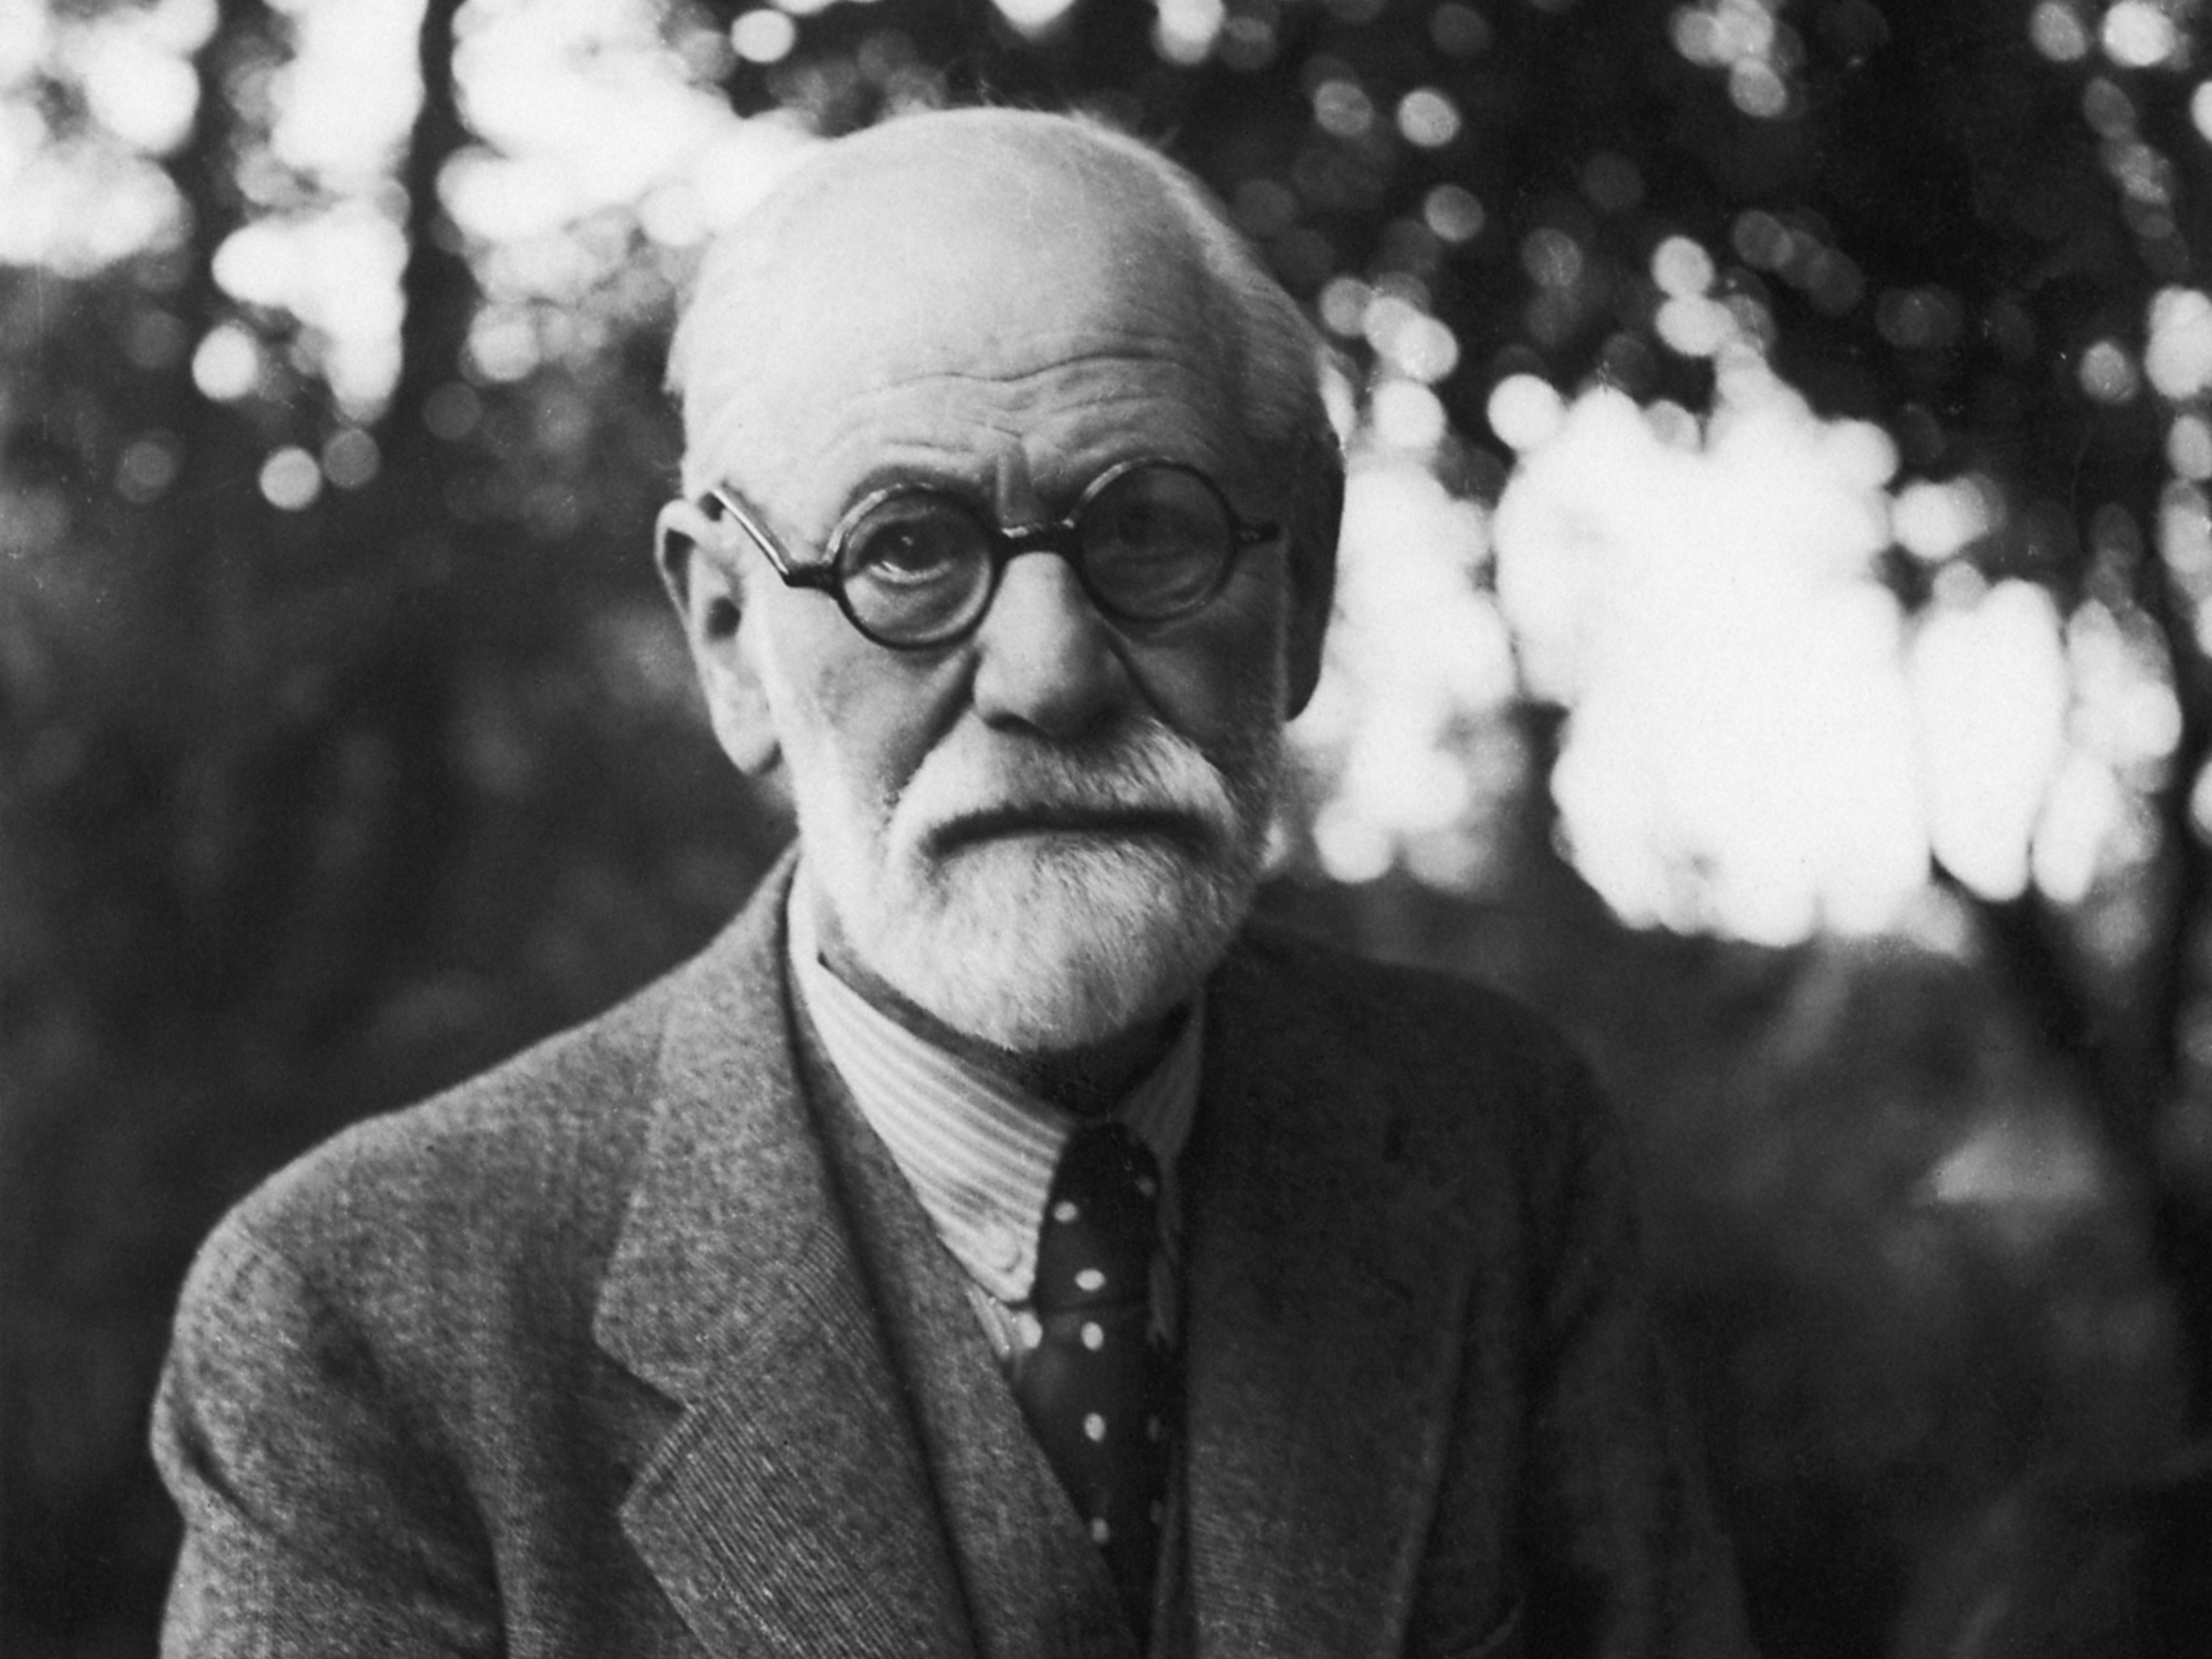 Freud’s influence on 20th-century intellectual life could hardly have been more profound